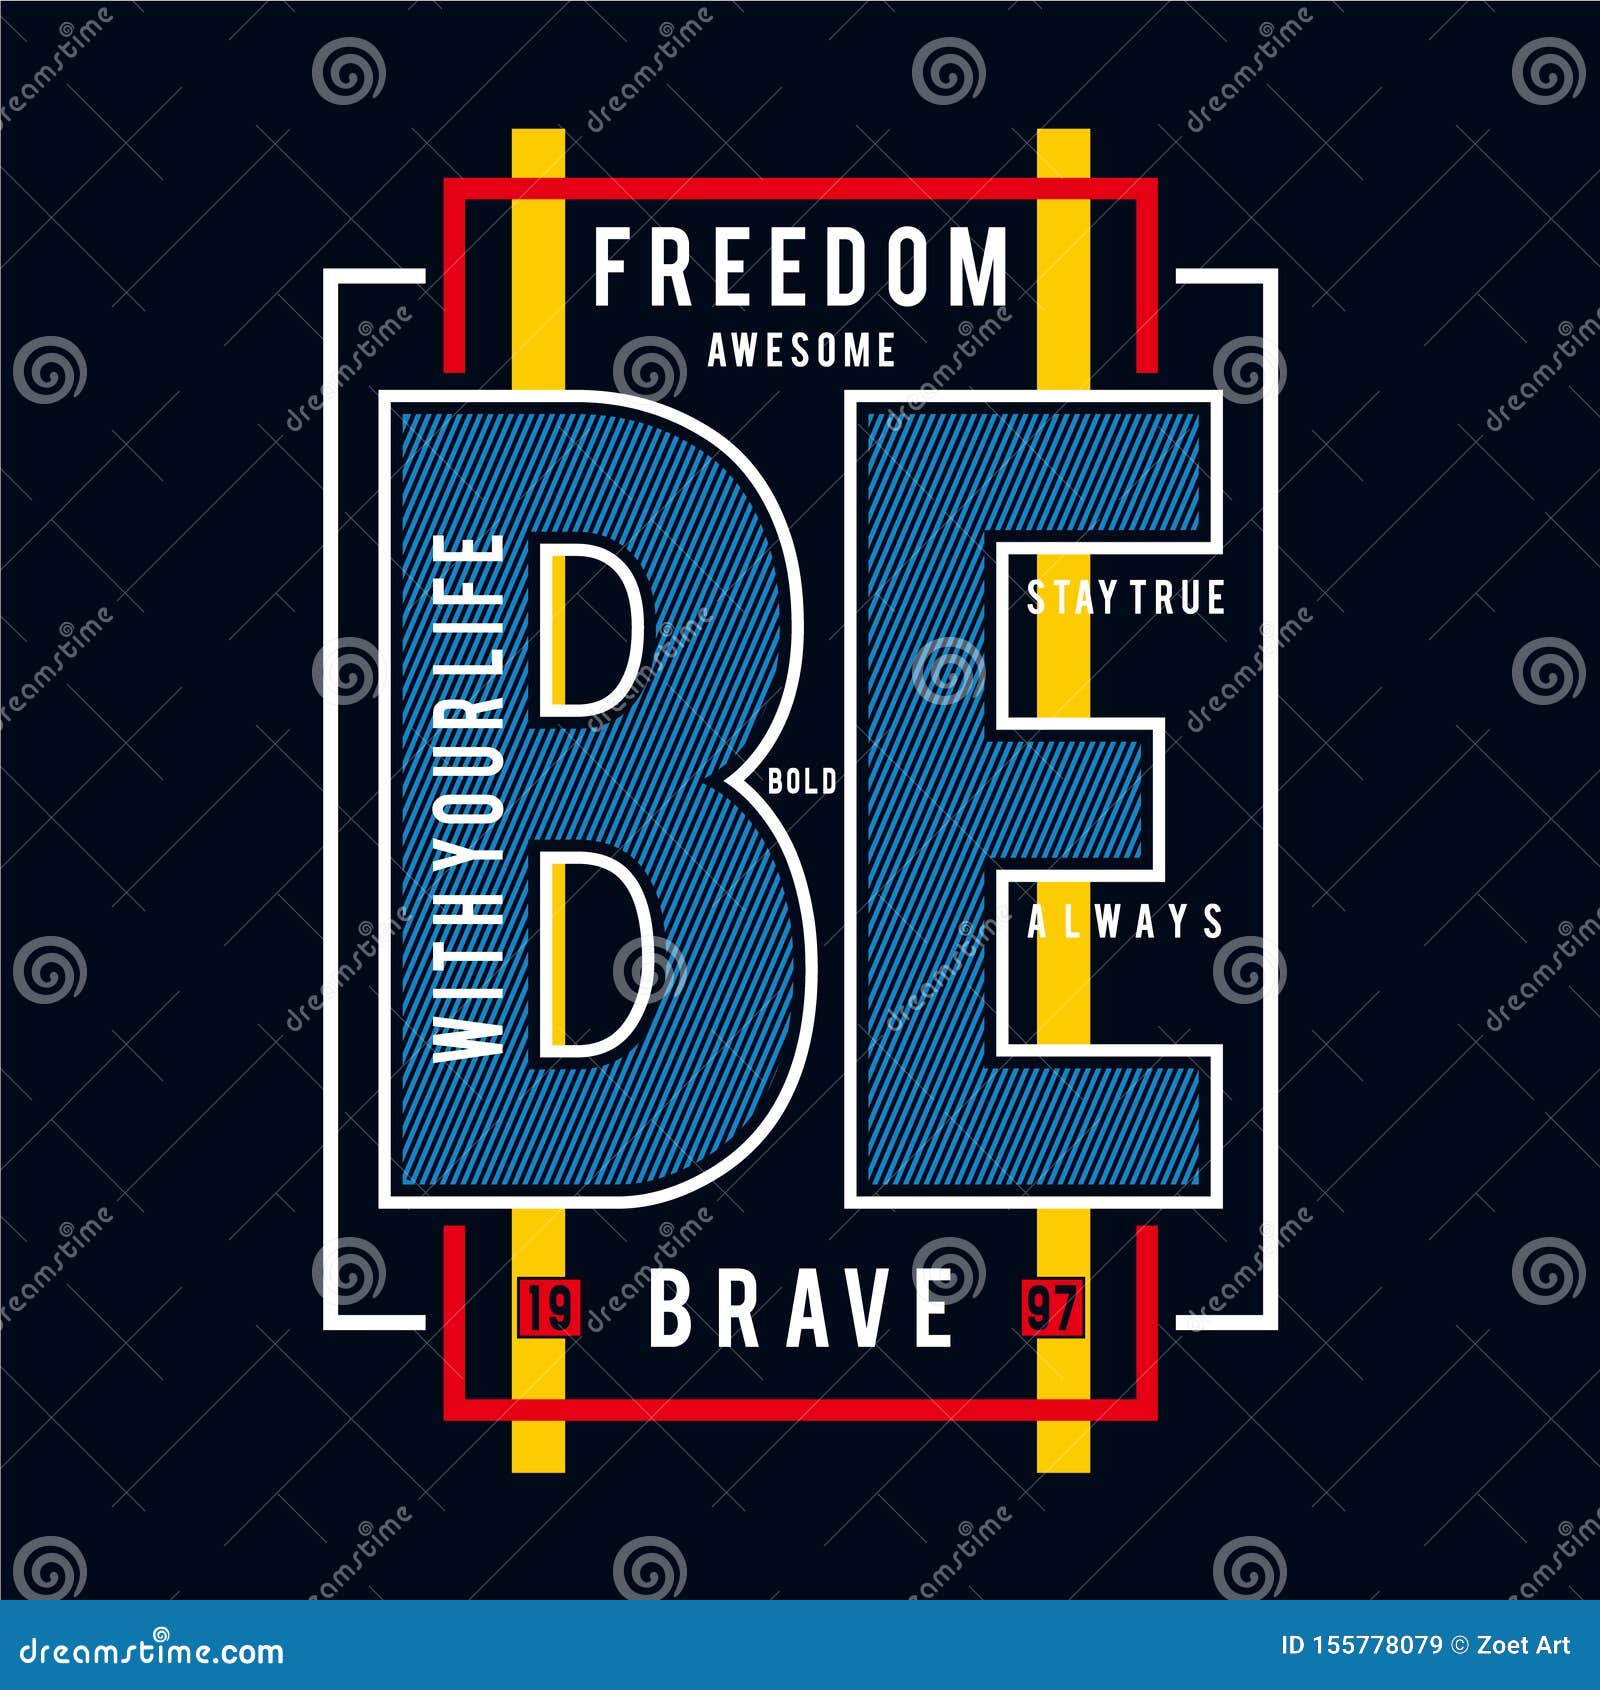 Freedom be brave typography t shirt graphic design. Freedom be brave typography design tee t shirt graphic design,vector illustration